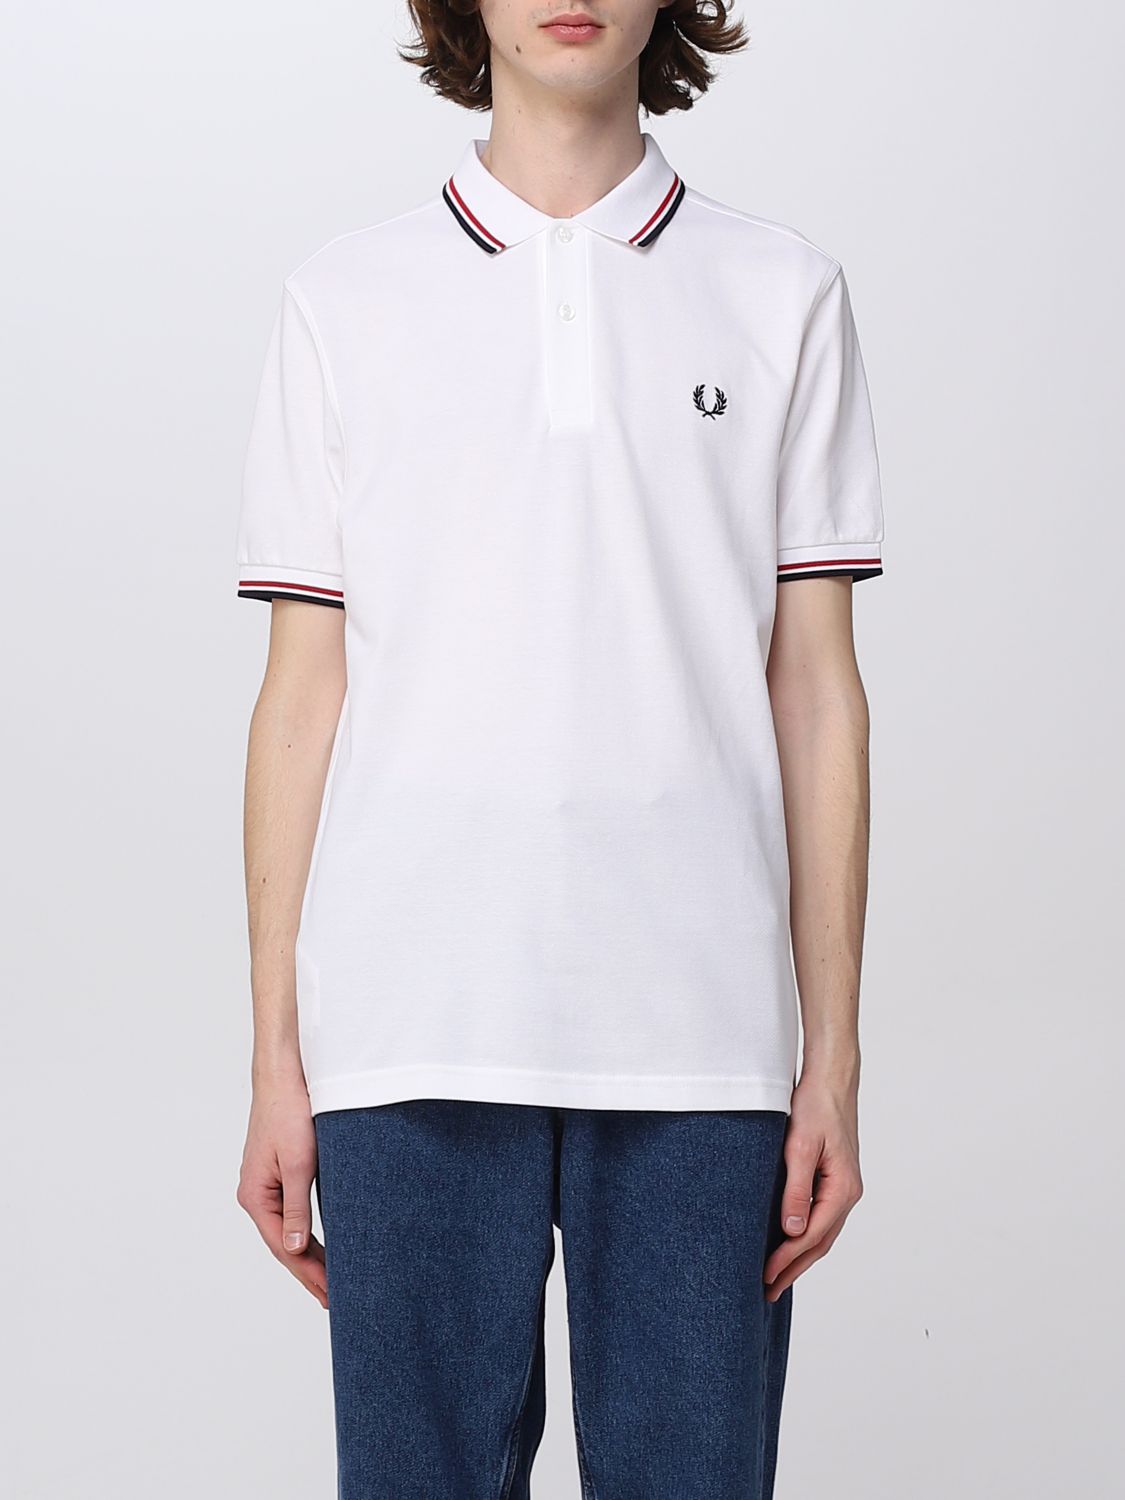 Cerco total mil millones FRED PERRY: polo shirt for man - White | Fred Perry polo shirt M3600 online  on GIGLIO.COM